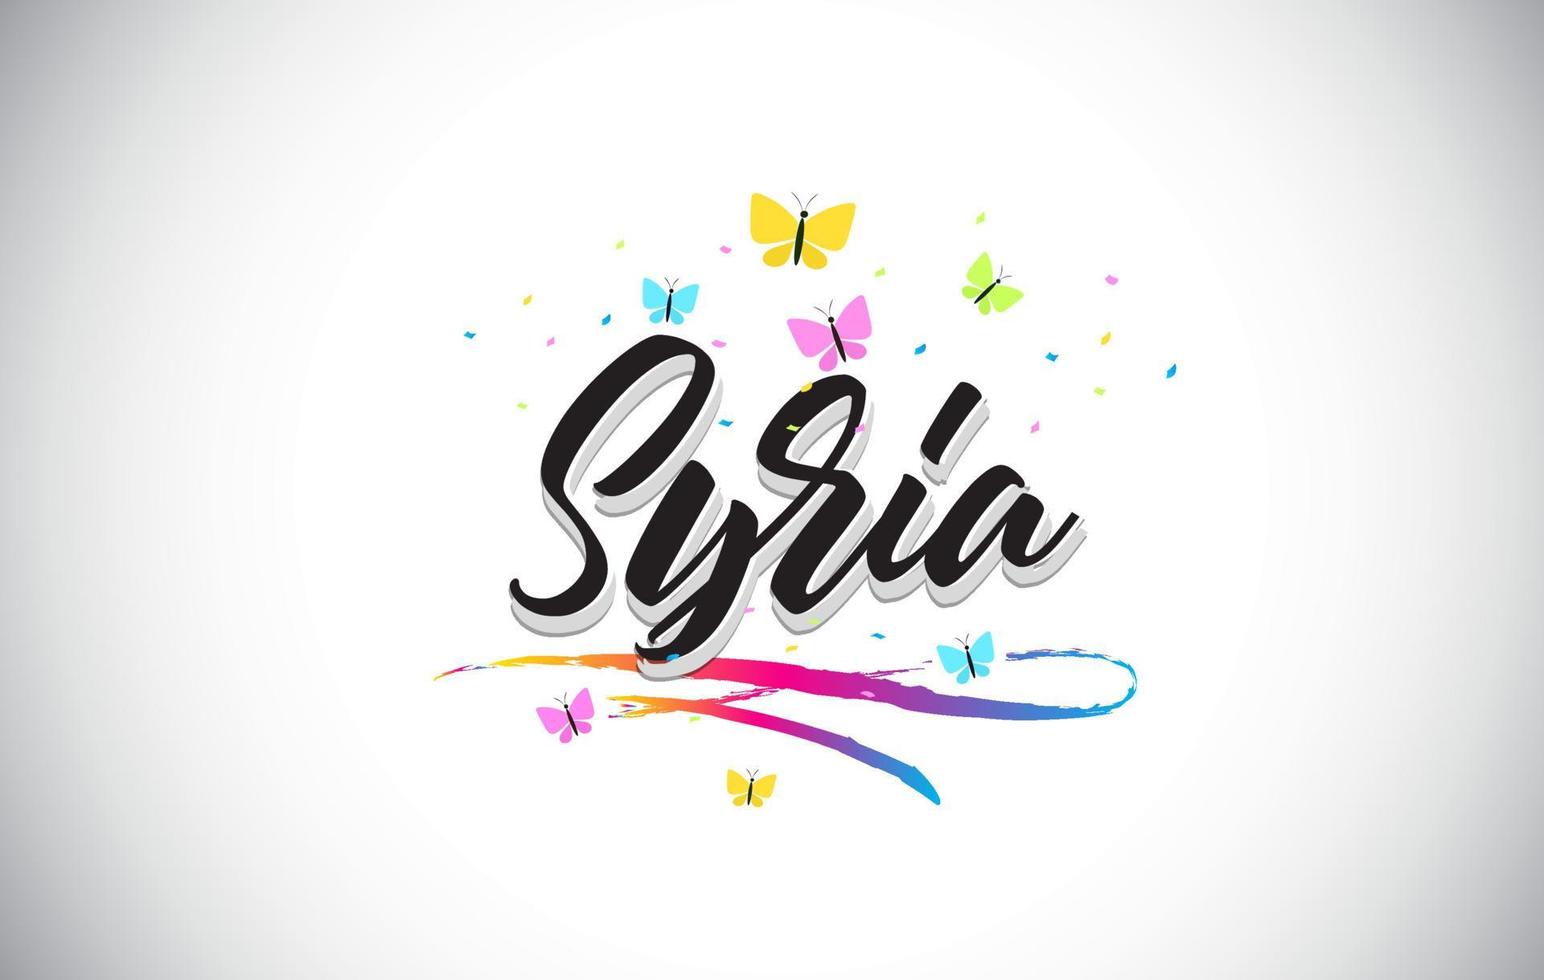 Syria Handwritten Vector Word Text with Butterflies and Colorful Swoosh.